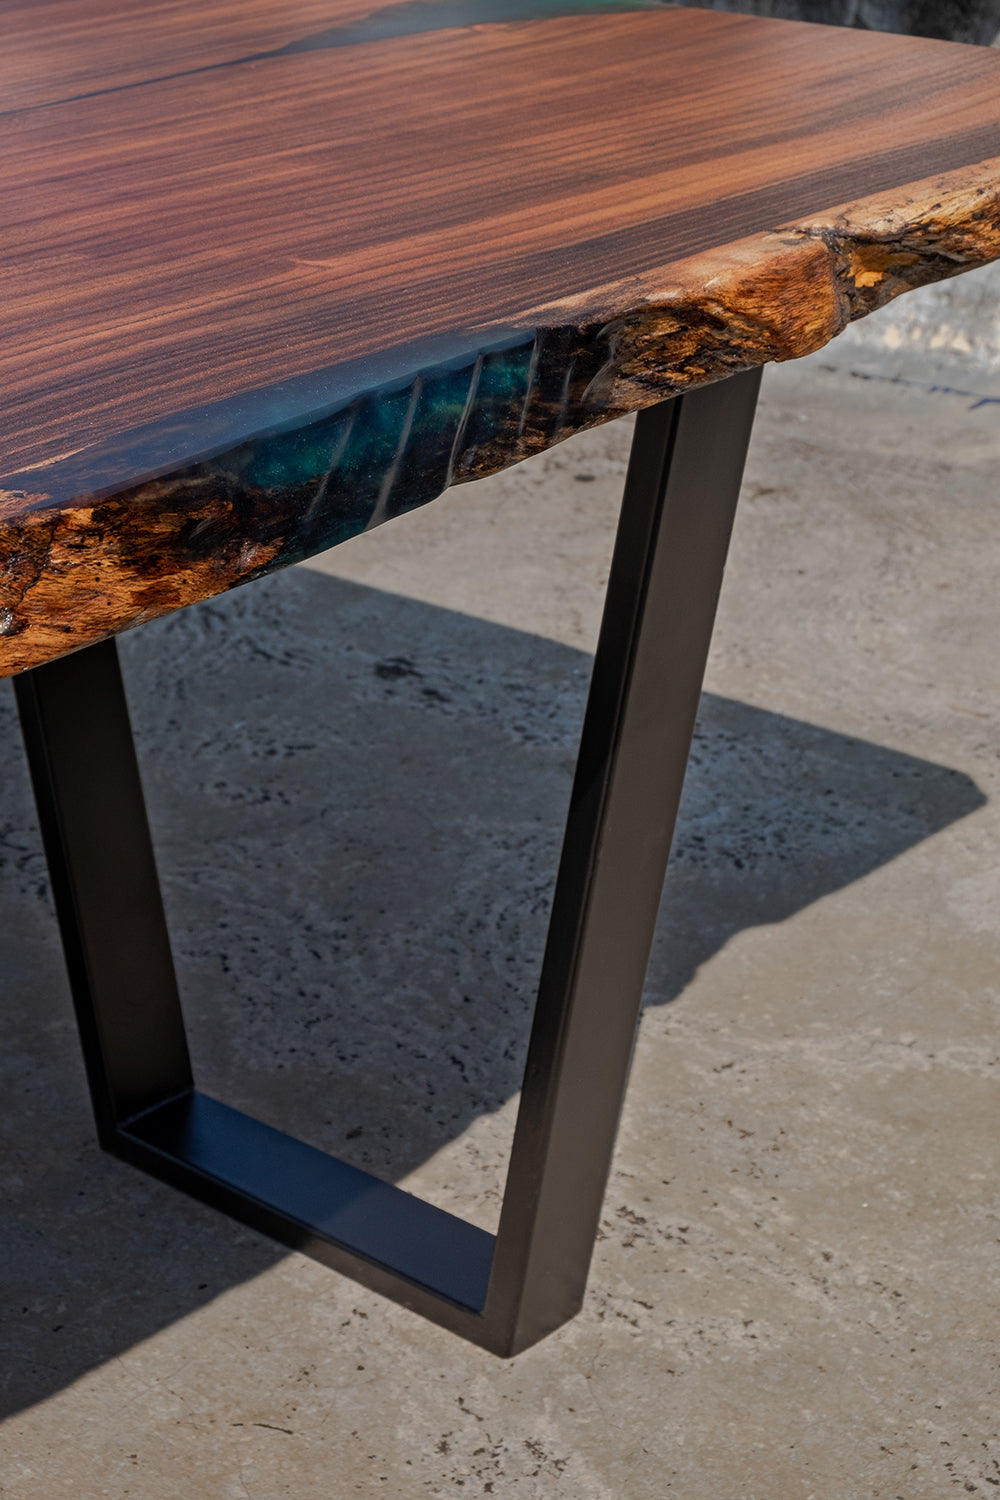 The Aviator Dining Table & Bench - I